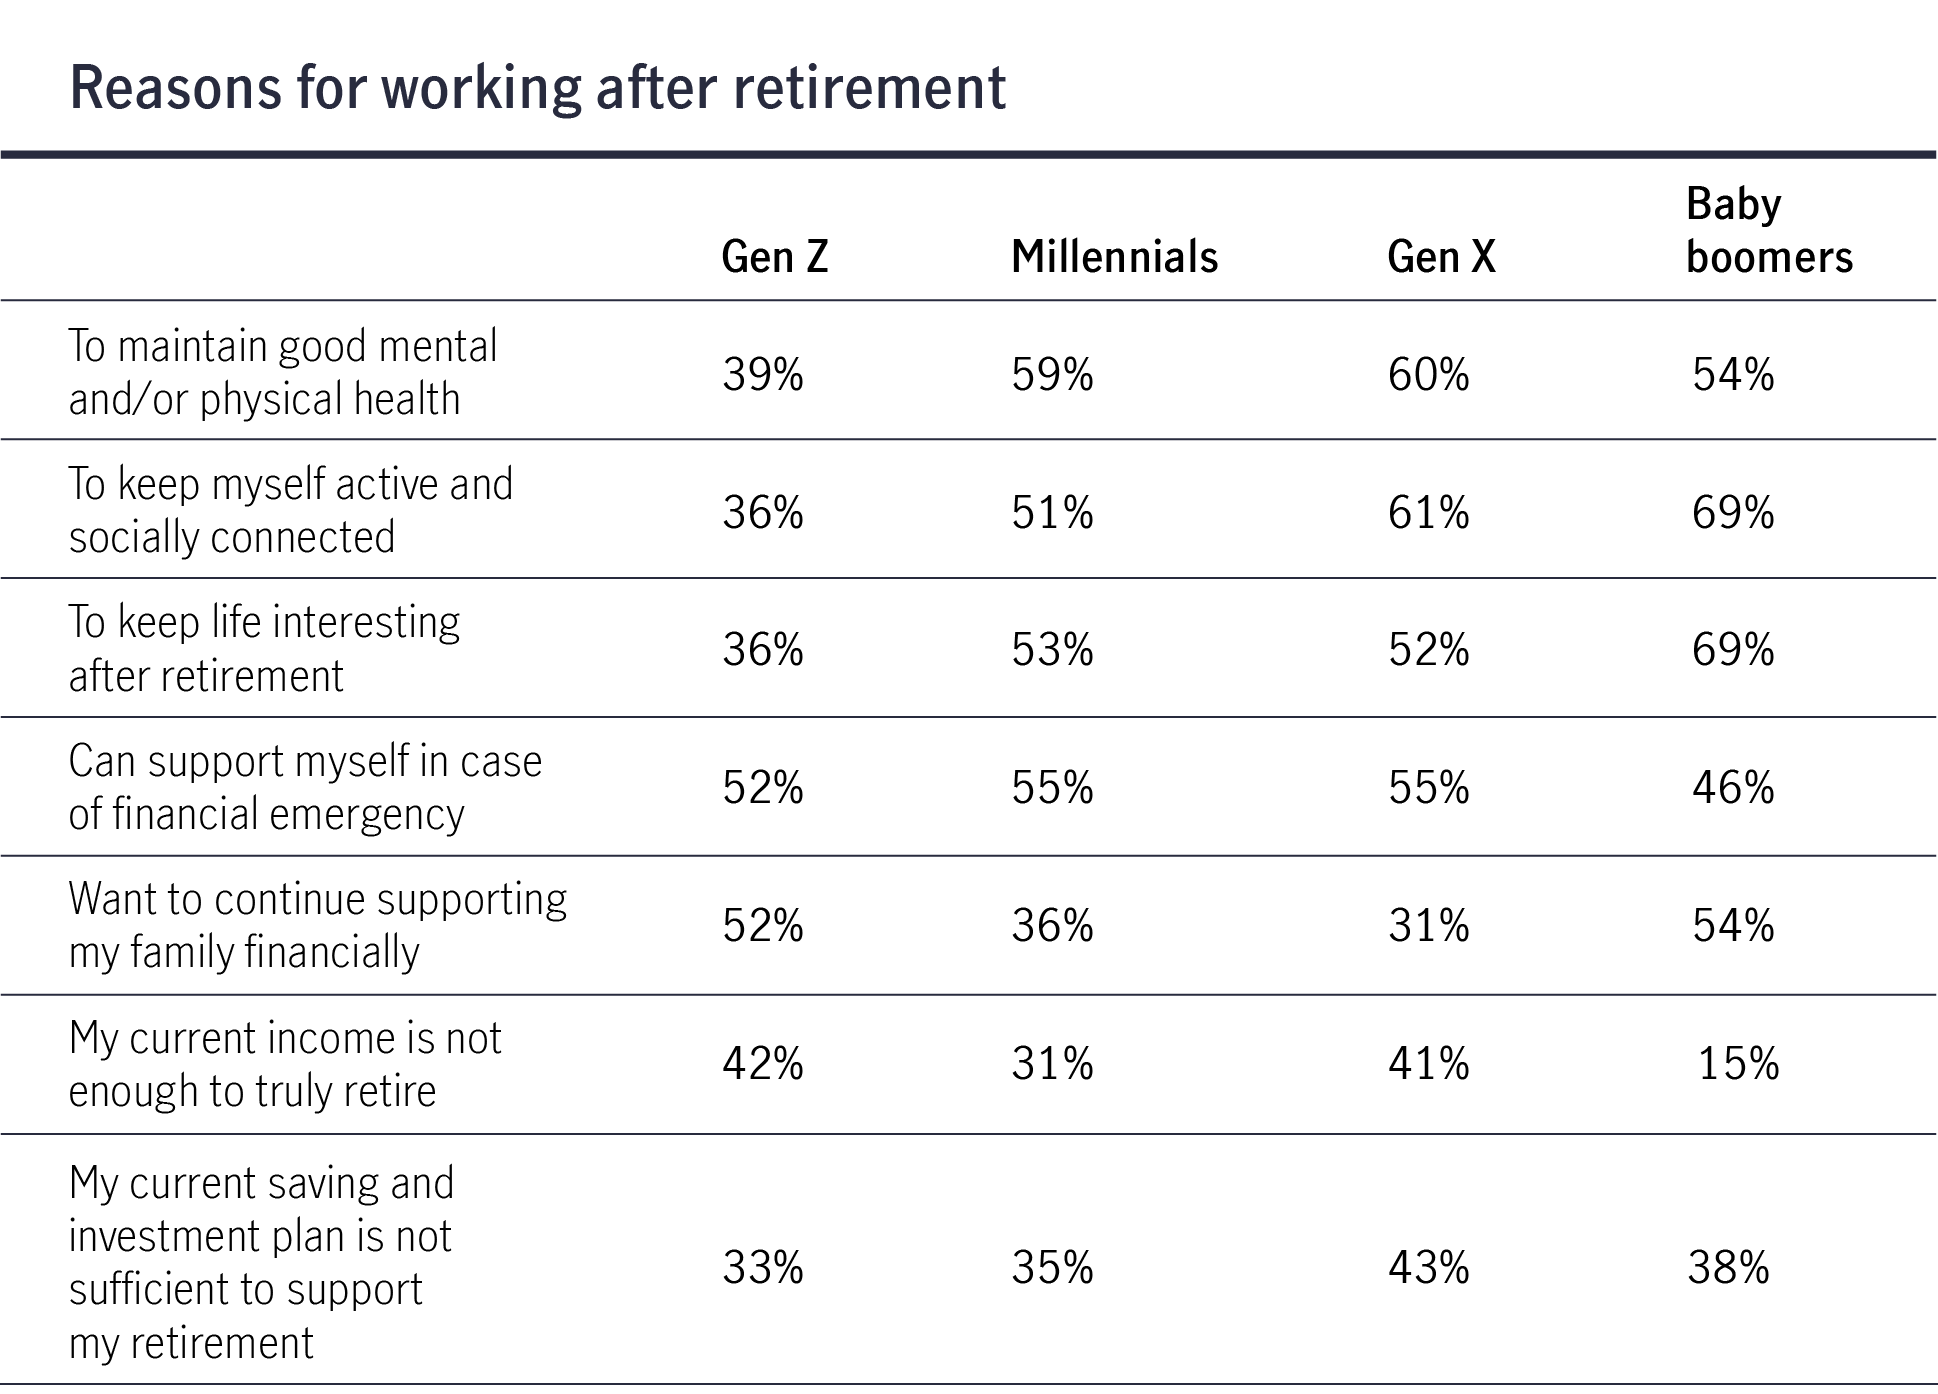 Reasons to work after retirement